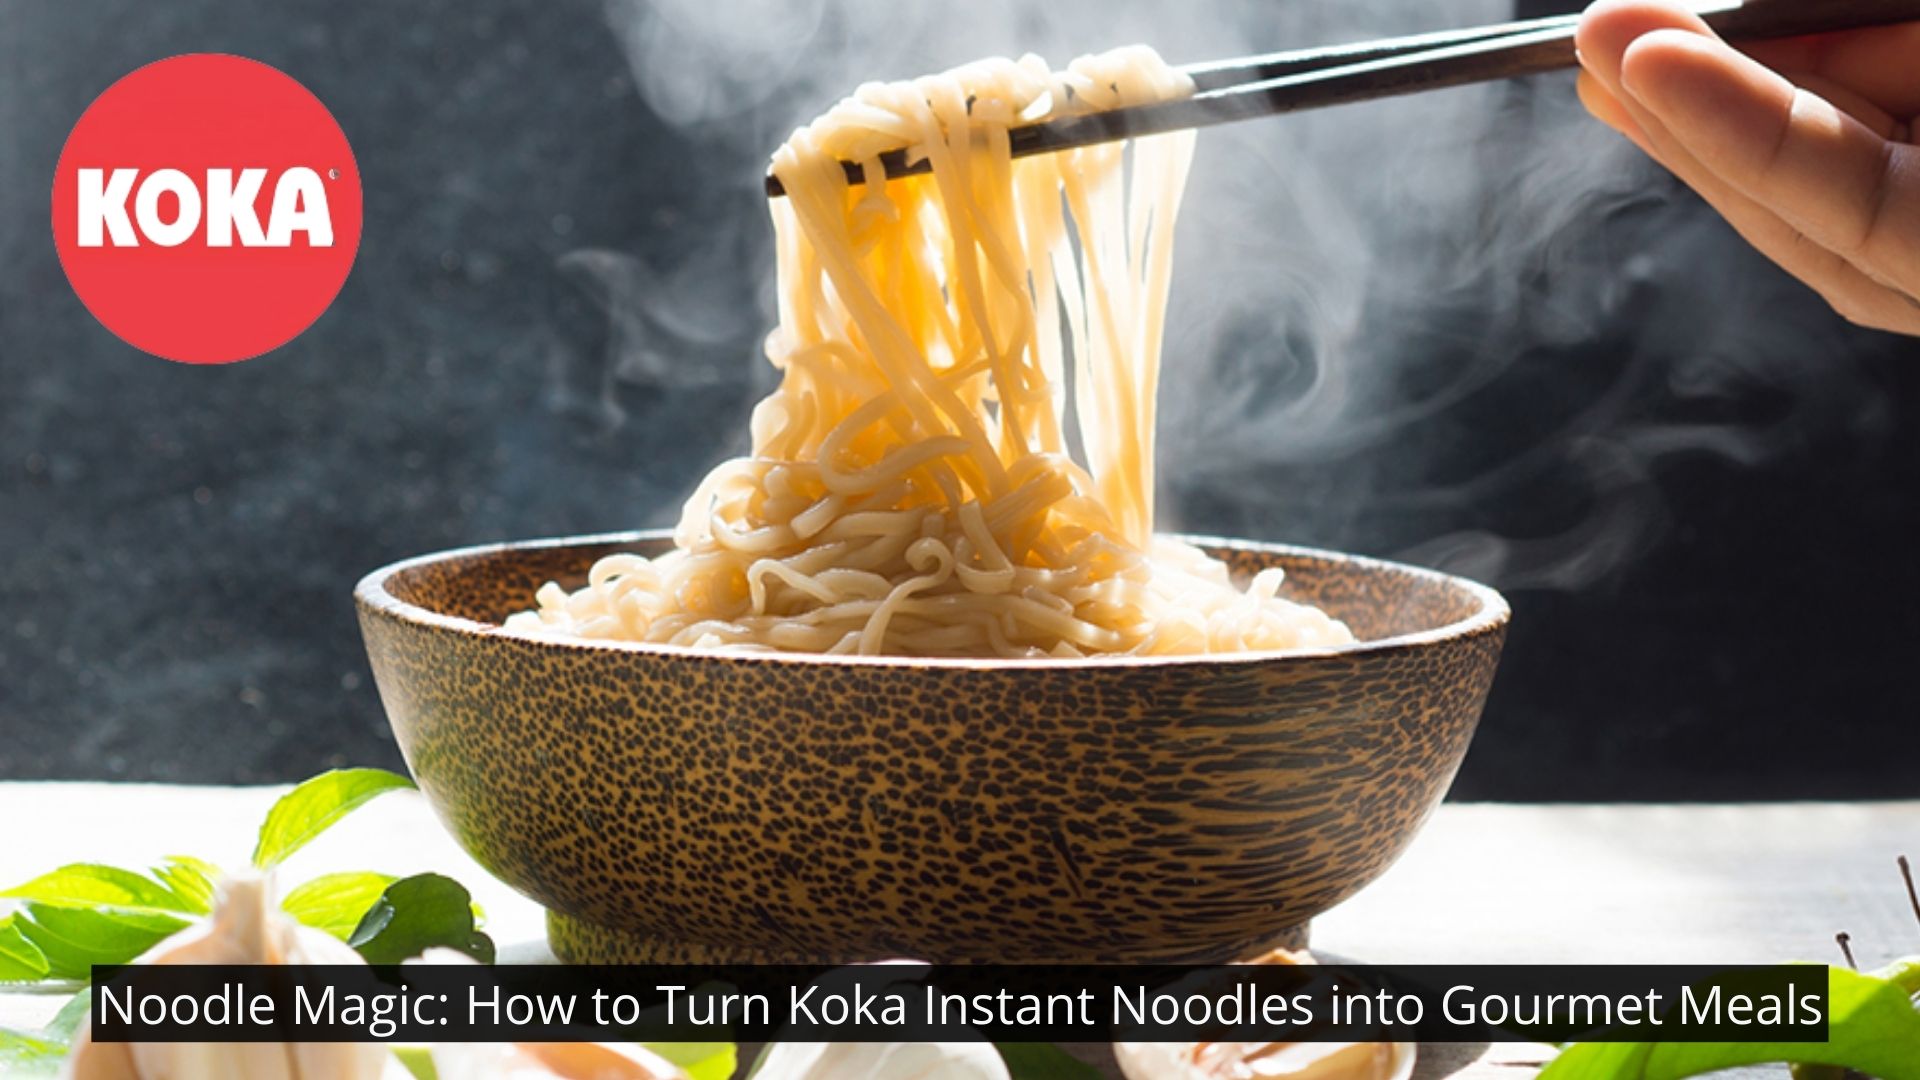 Noodle Magic How to Turn Koka Instant Noodles into Gourmet Meals